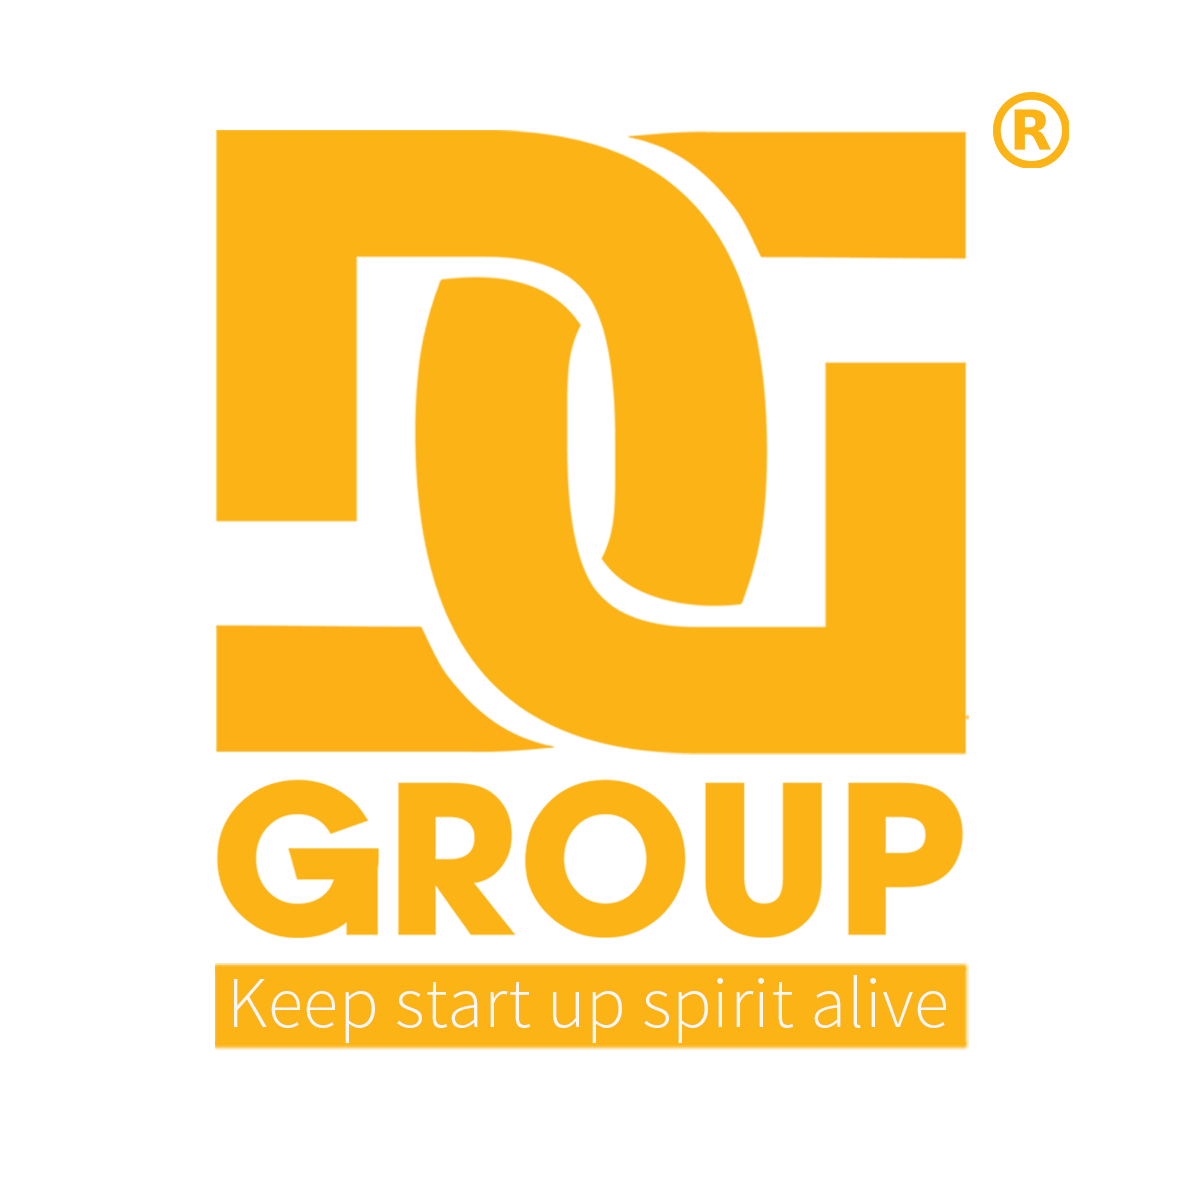 DGROUP HOLDINGS